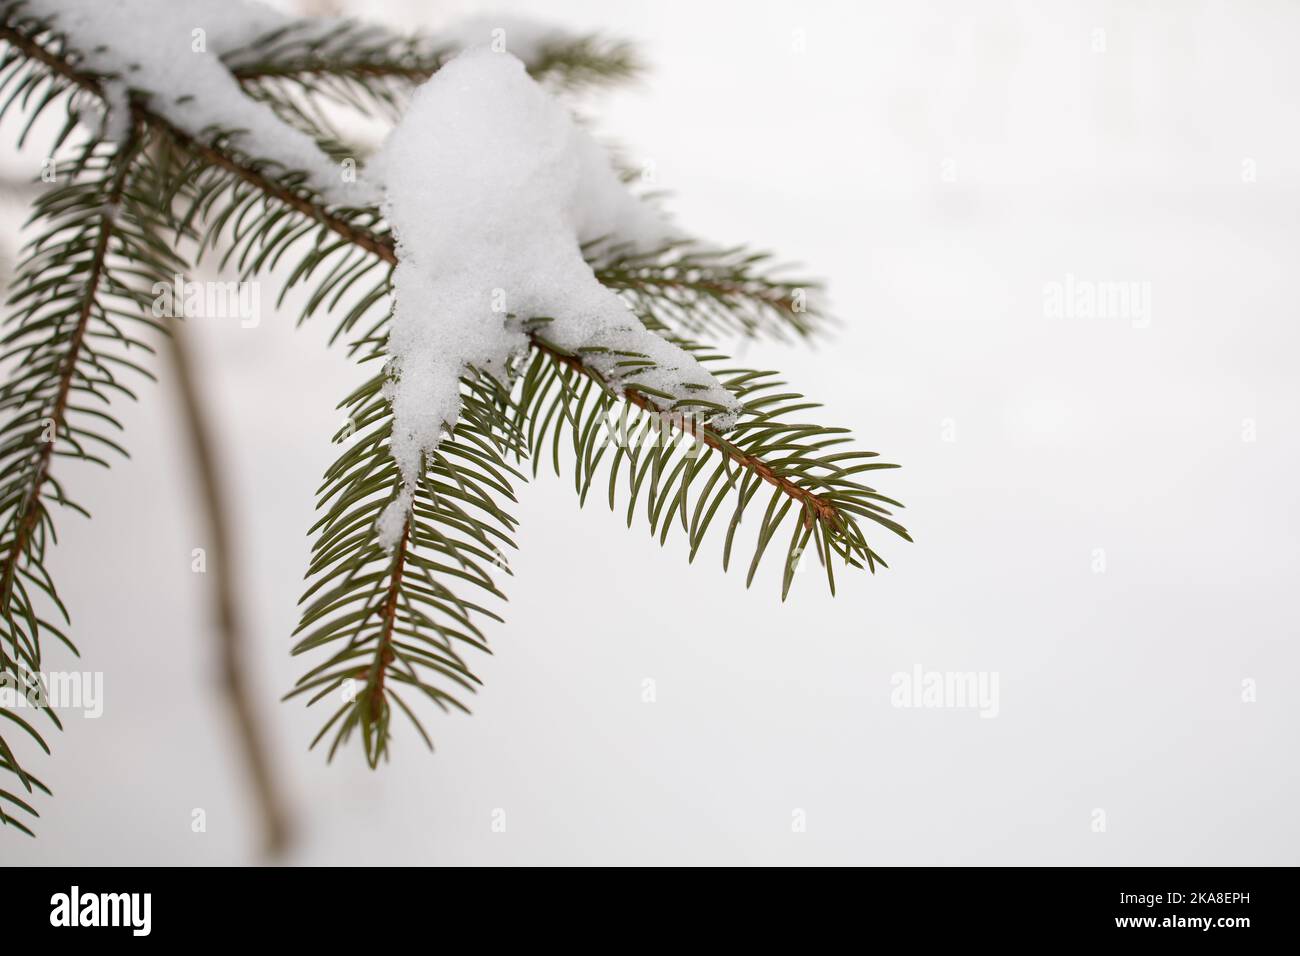 A closeup shot of a needle fir covered with snow on the blurry background Stock Photo